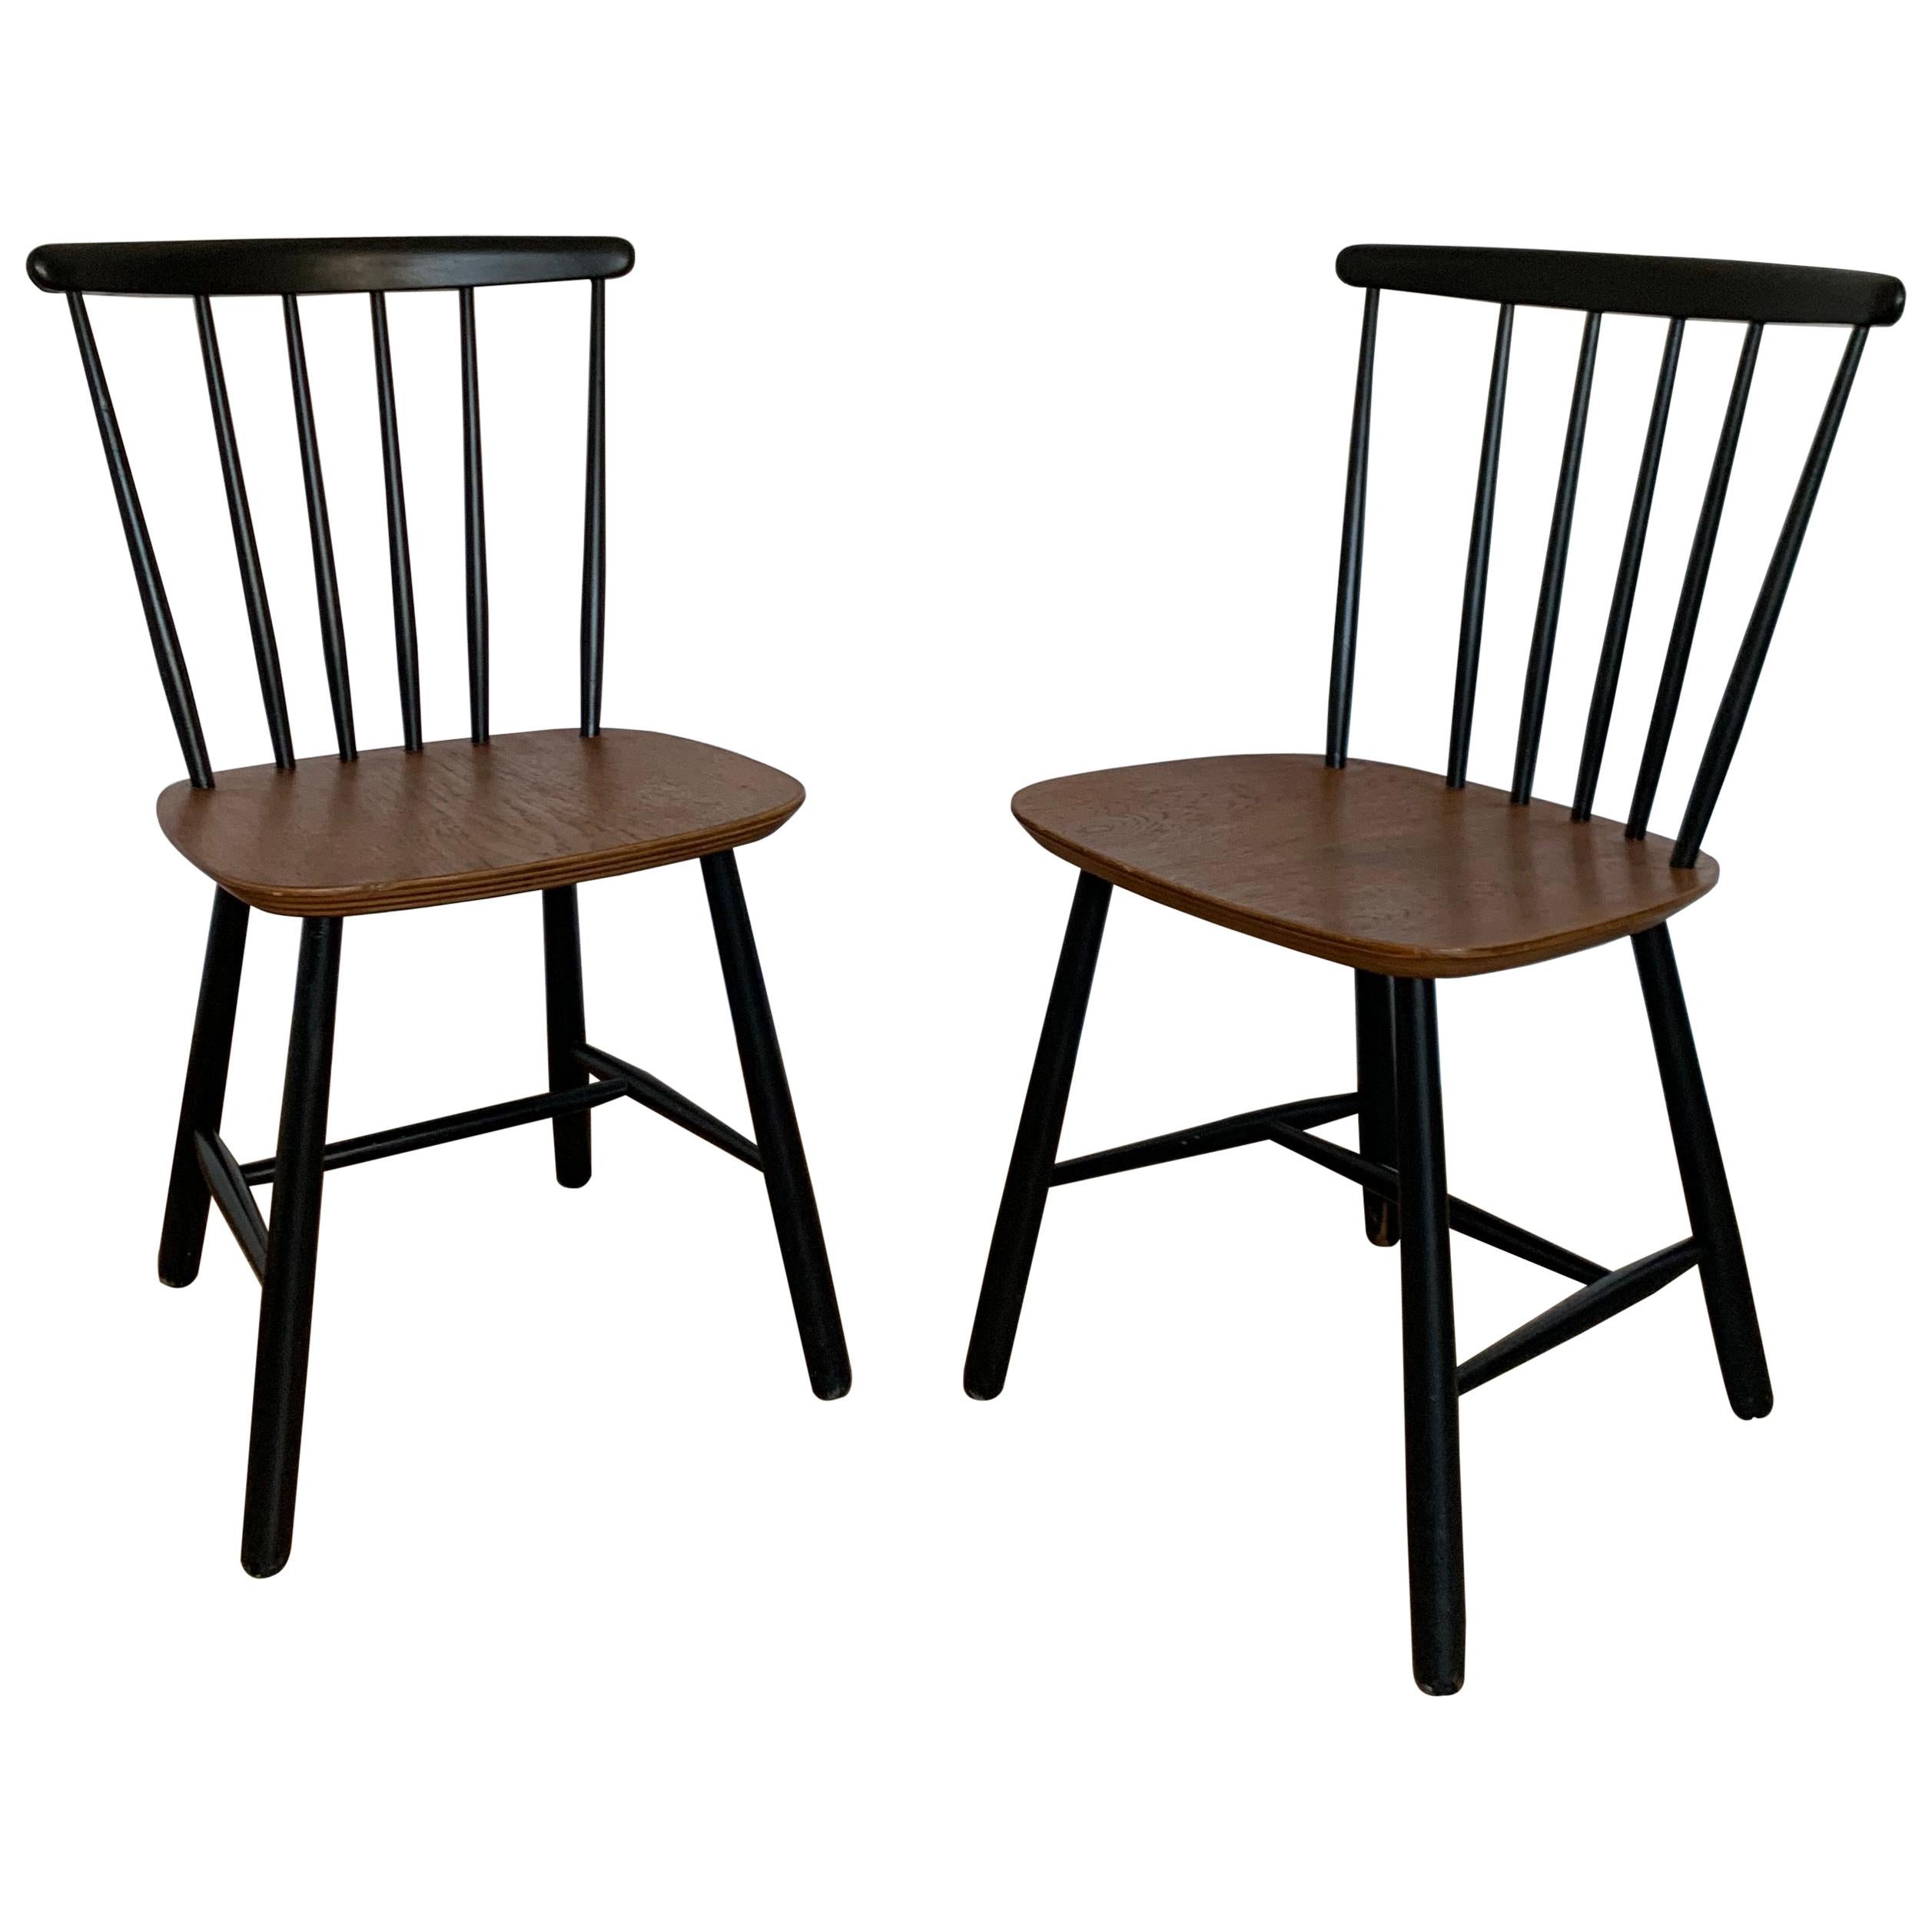 20th Century Spindle Wood Ilmar Tapiovaara Style Classic Chairs, 1960s Set of 2